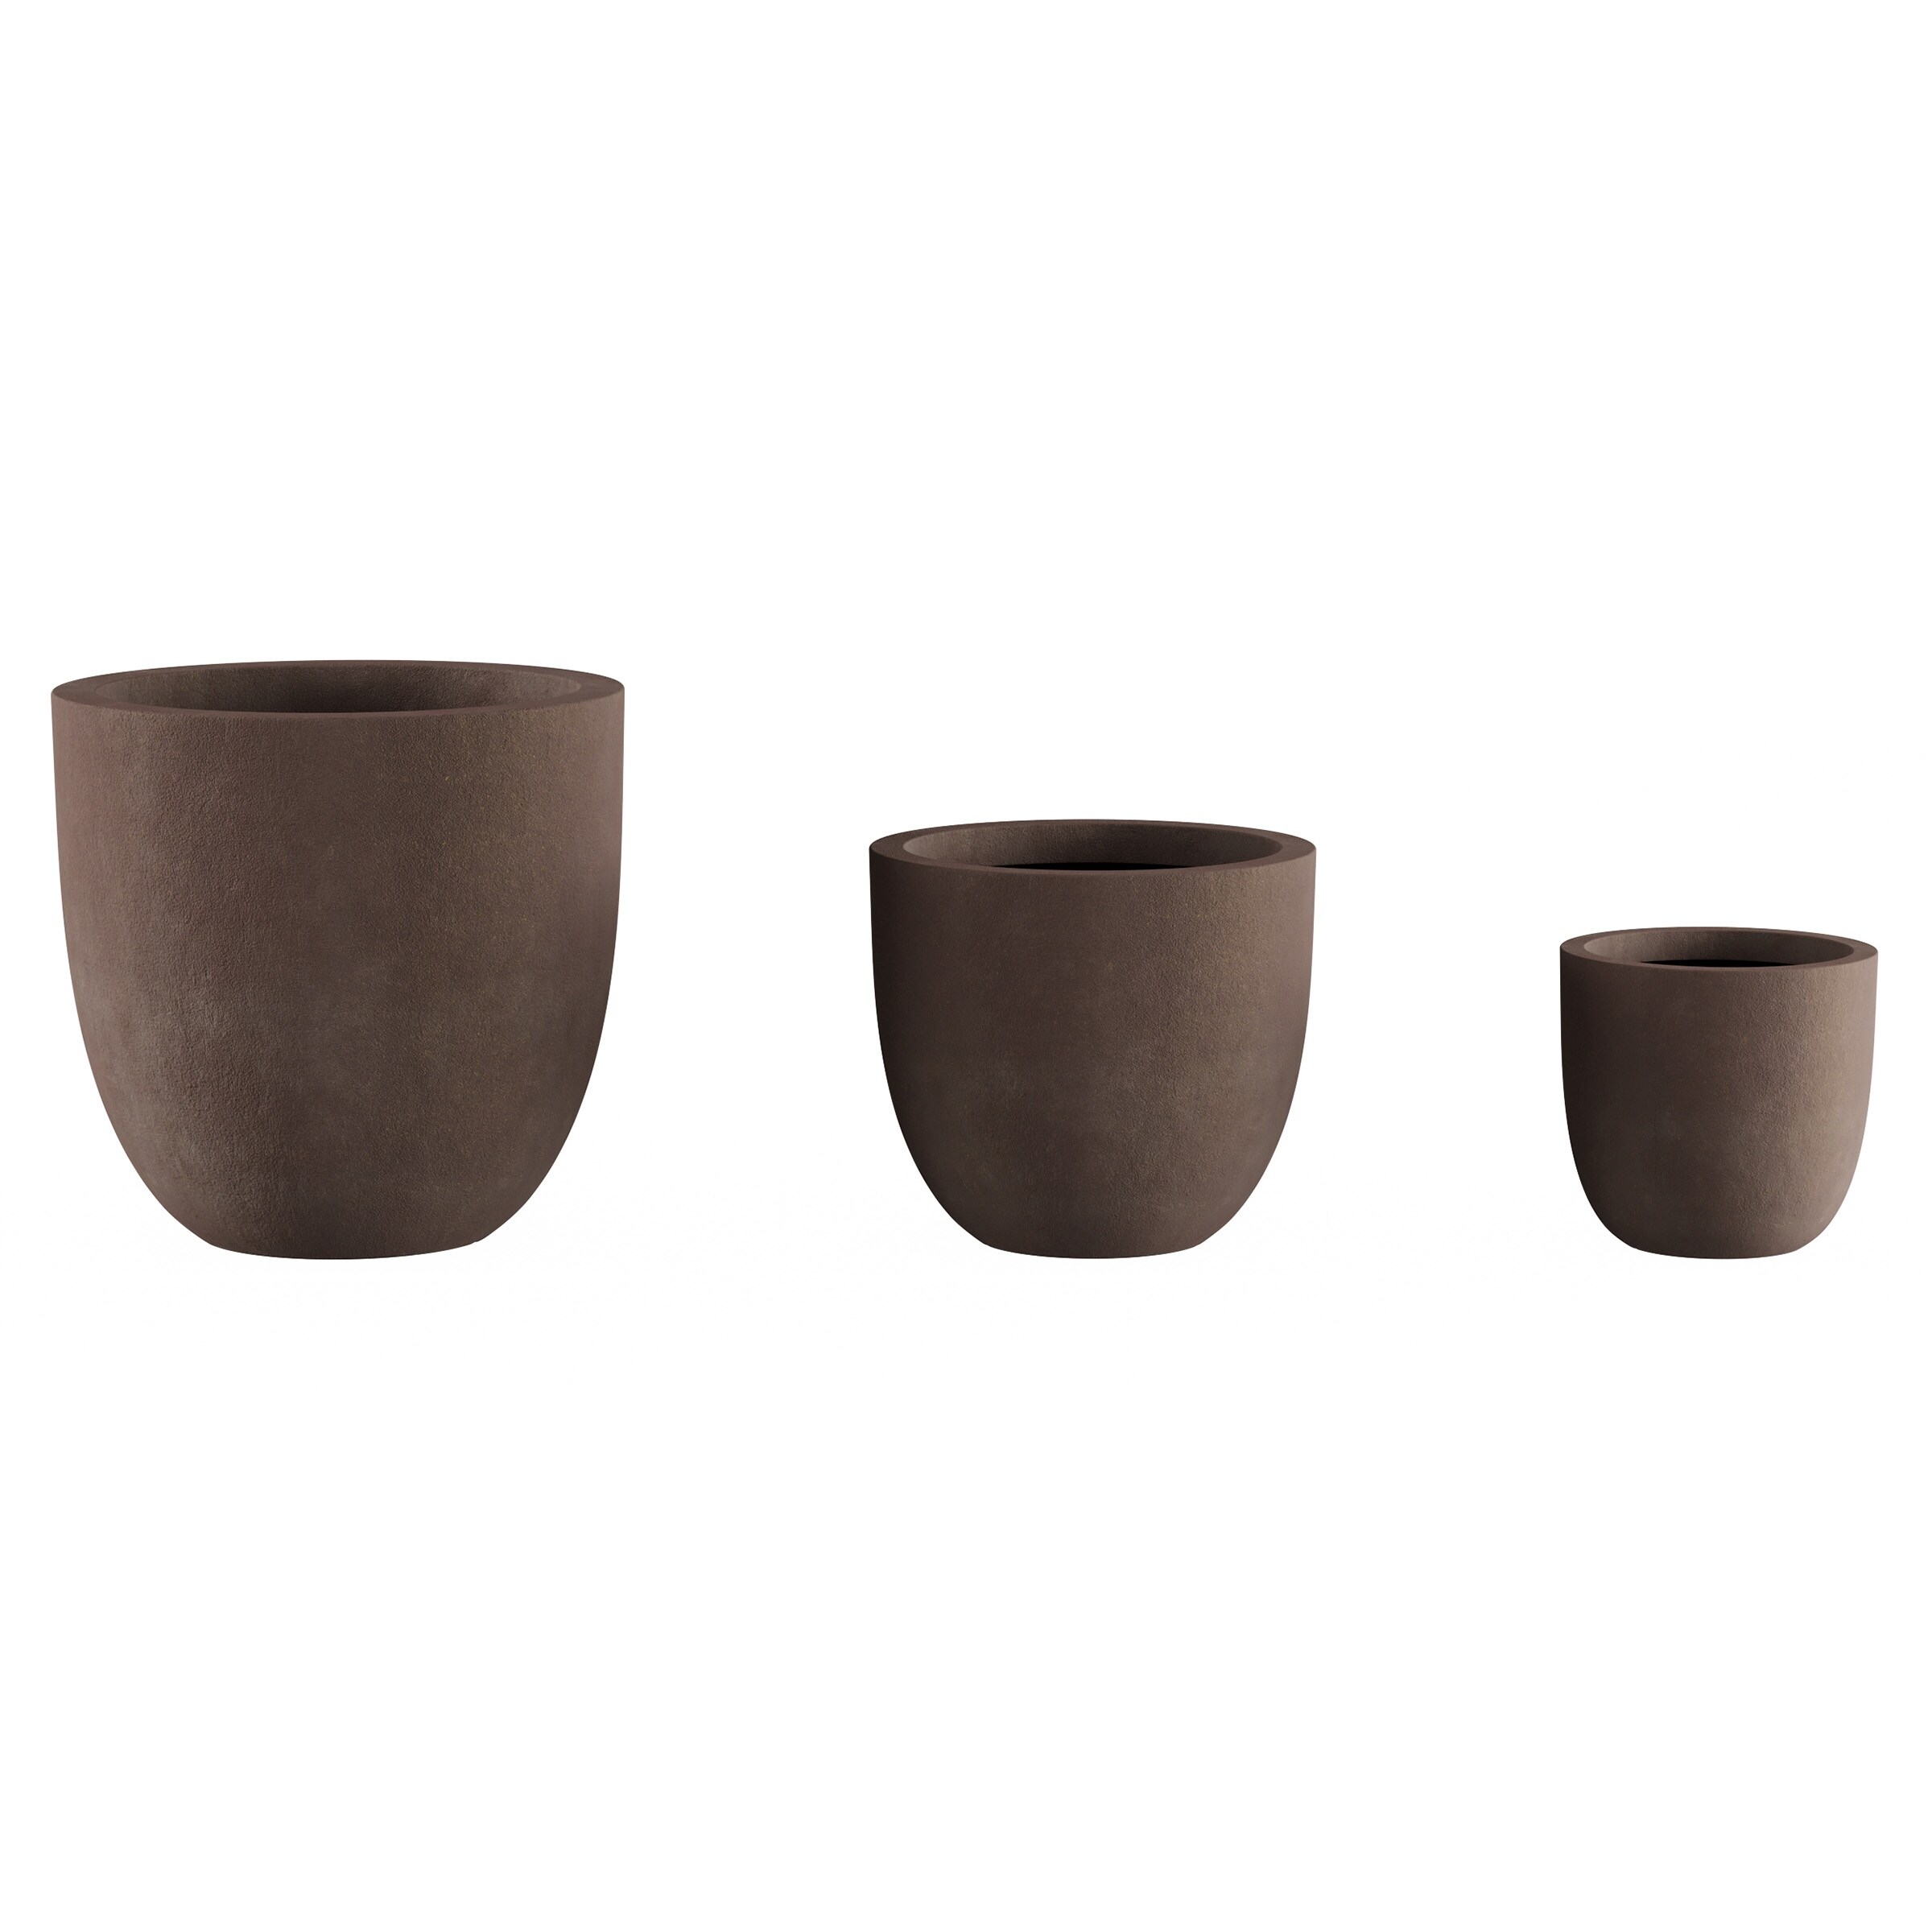 https://ak1.ostkcdn.com/images/products/is/images/direct/95161afcf5477e357f5ee73c213643742512e35a/Set-of-3-Fiber-Clay-Planters--Round-Outdoor-Potting-and-Replanting-Pots-Weather-Resistant-with-Drainage-Holes-by-Pure-Garden.jpg